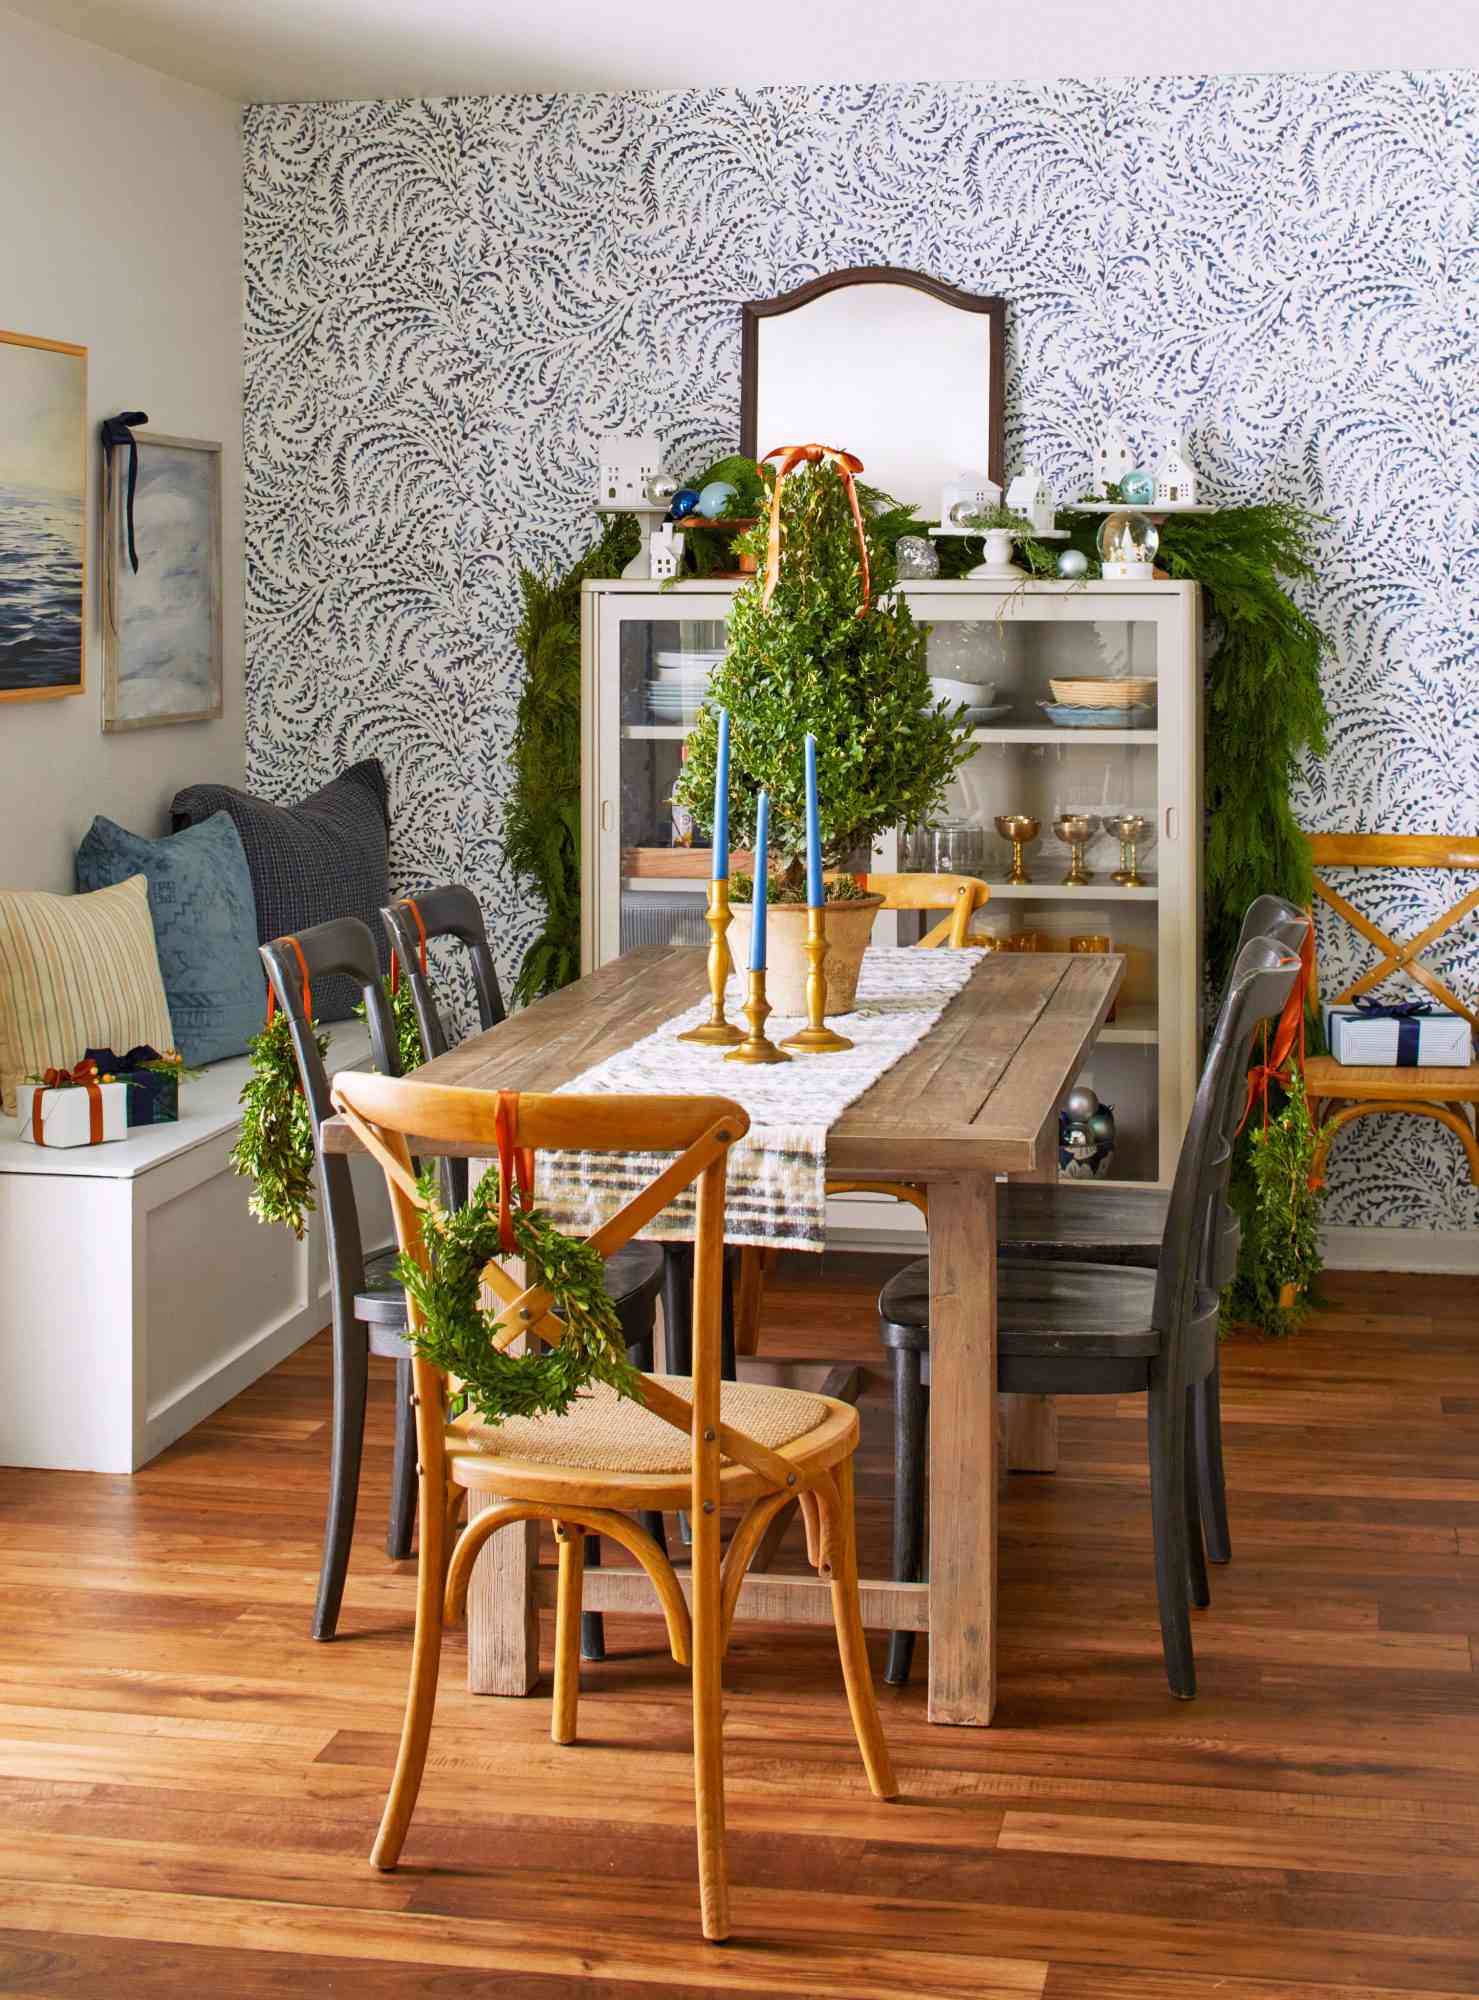 Dining room decorated with greenery and other holiday trim